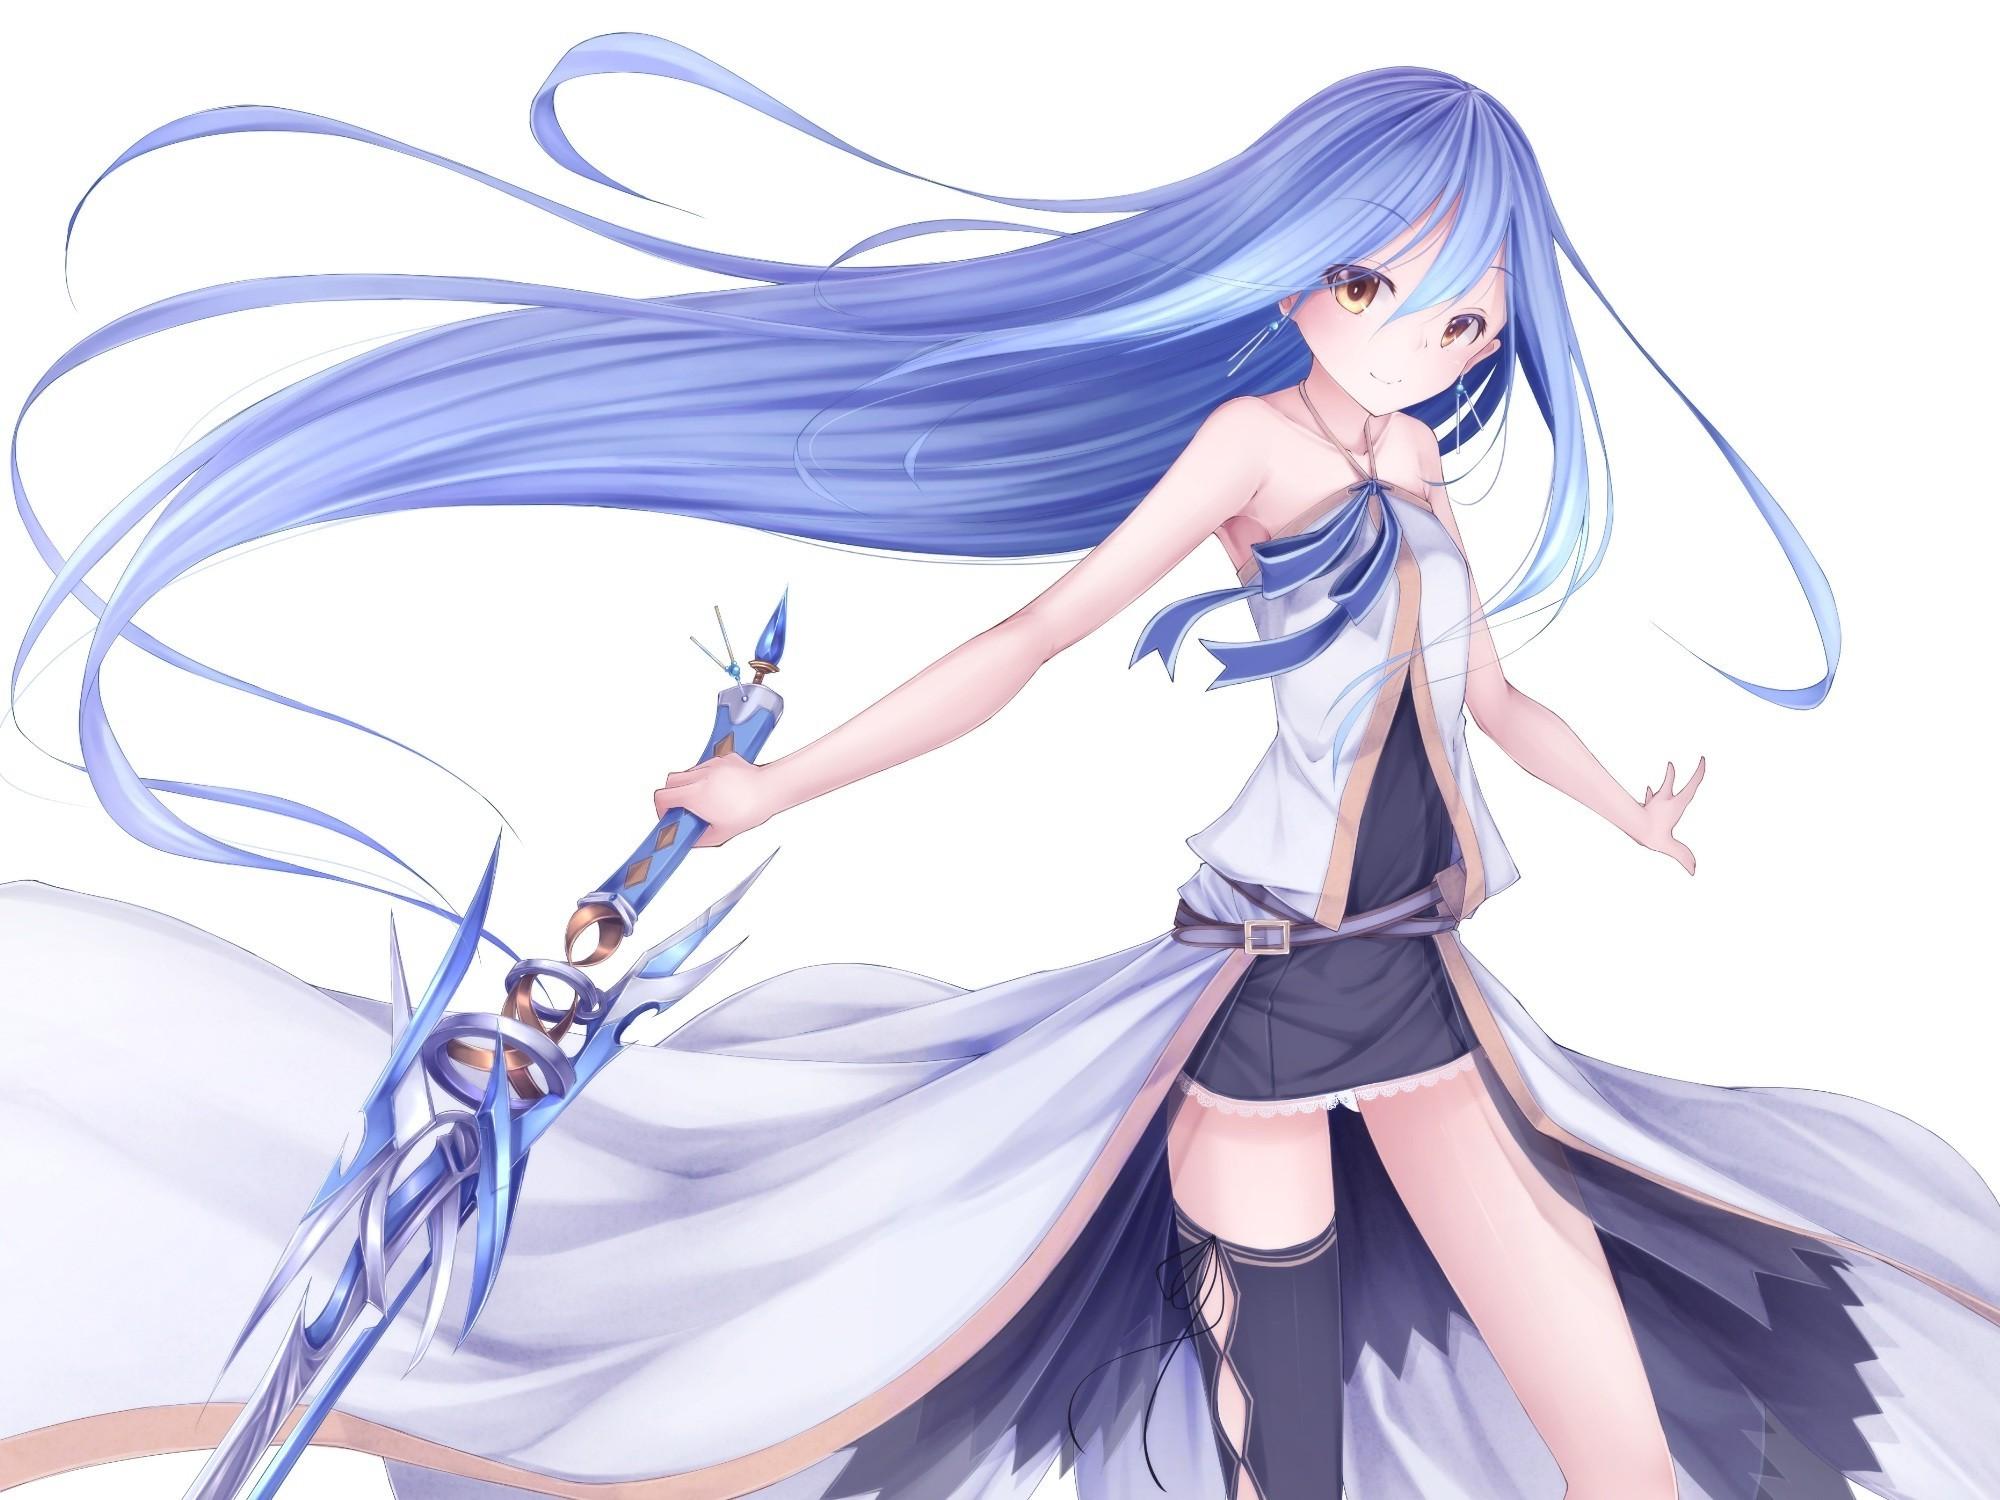 5. "Anime with Light Blue Hair and Purple Eyes" - wide 8